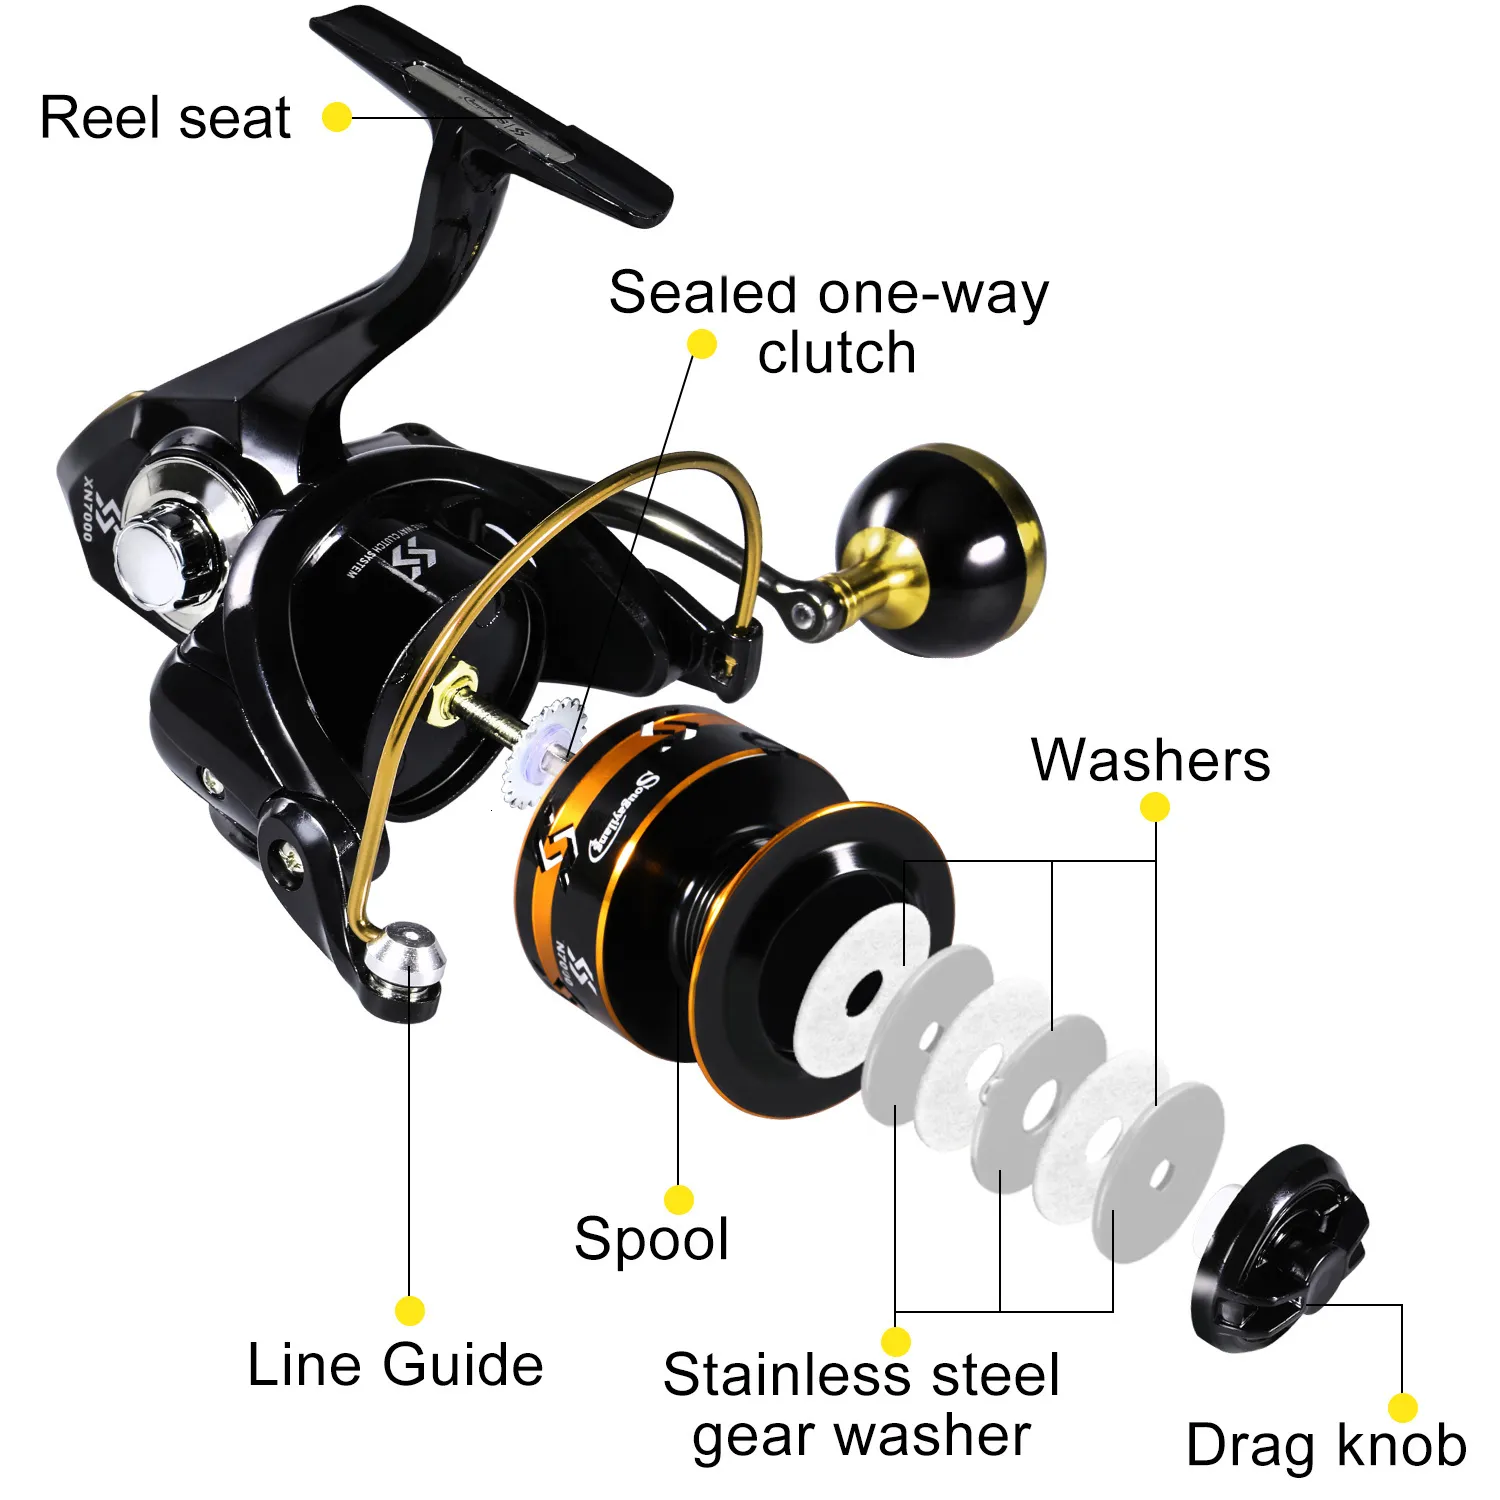 Baitcasting Reels Sougayilang Spinning Fishing Reel High Strength Cast  Alloy Drive Gear Aluminum Spool Saltwater Freshwater Spinning Reel Pesca  230619 From Wai05, $20.71